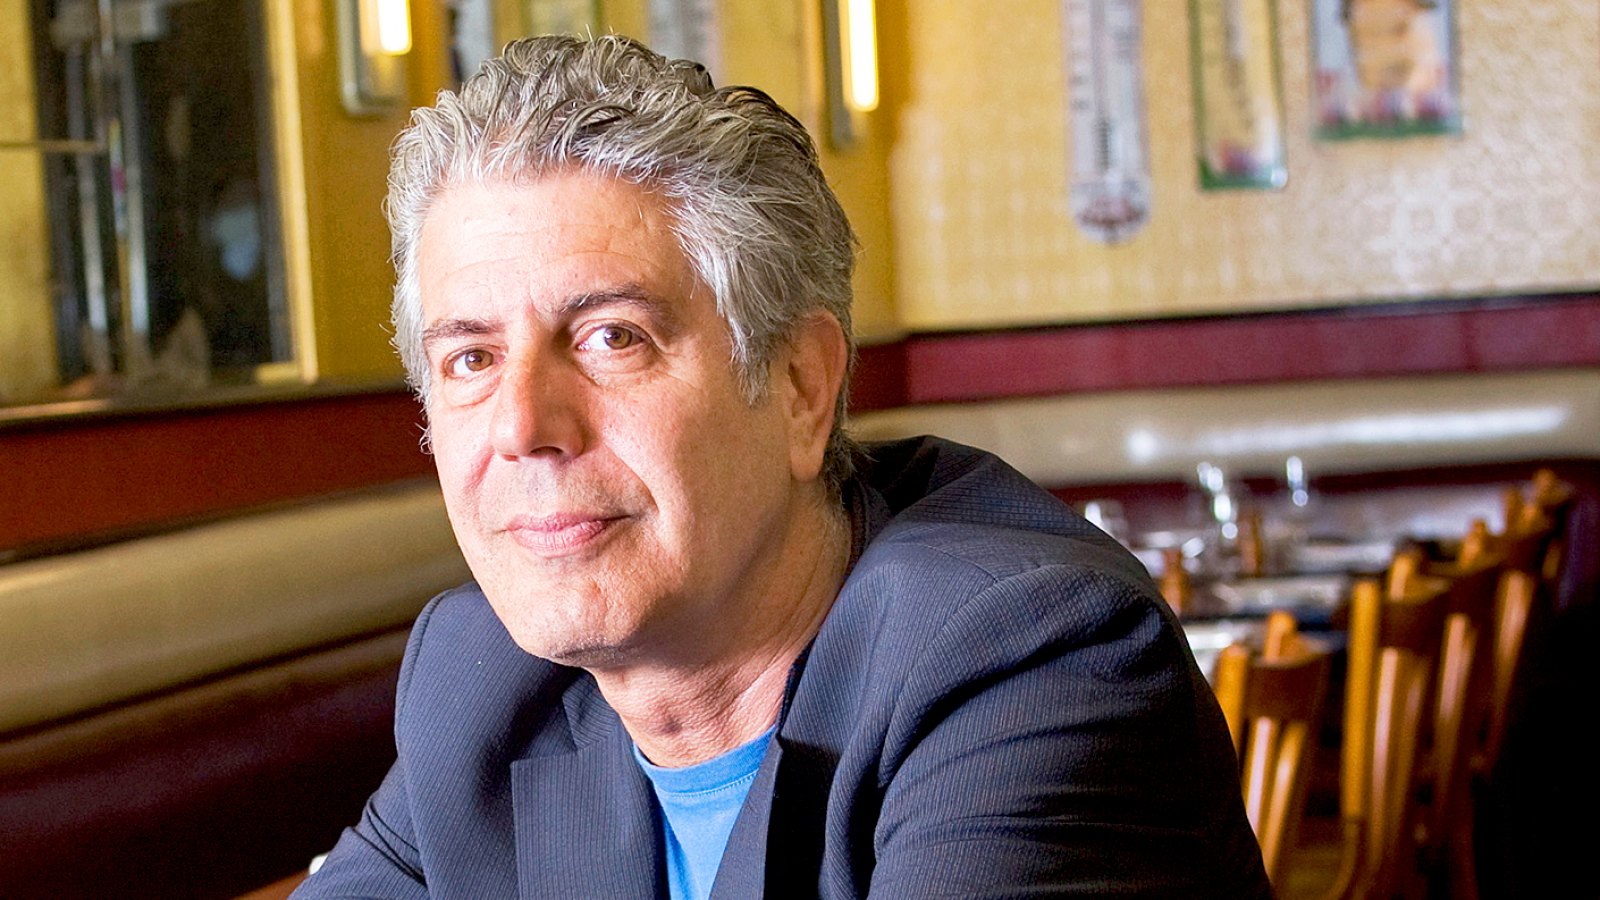 Anthony Bourdain at Cafe D'Alsace